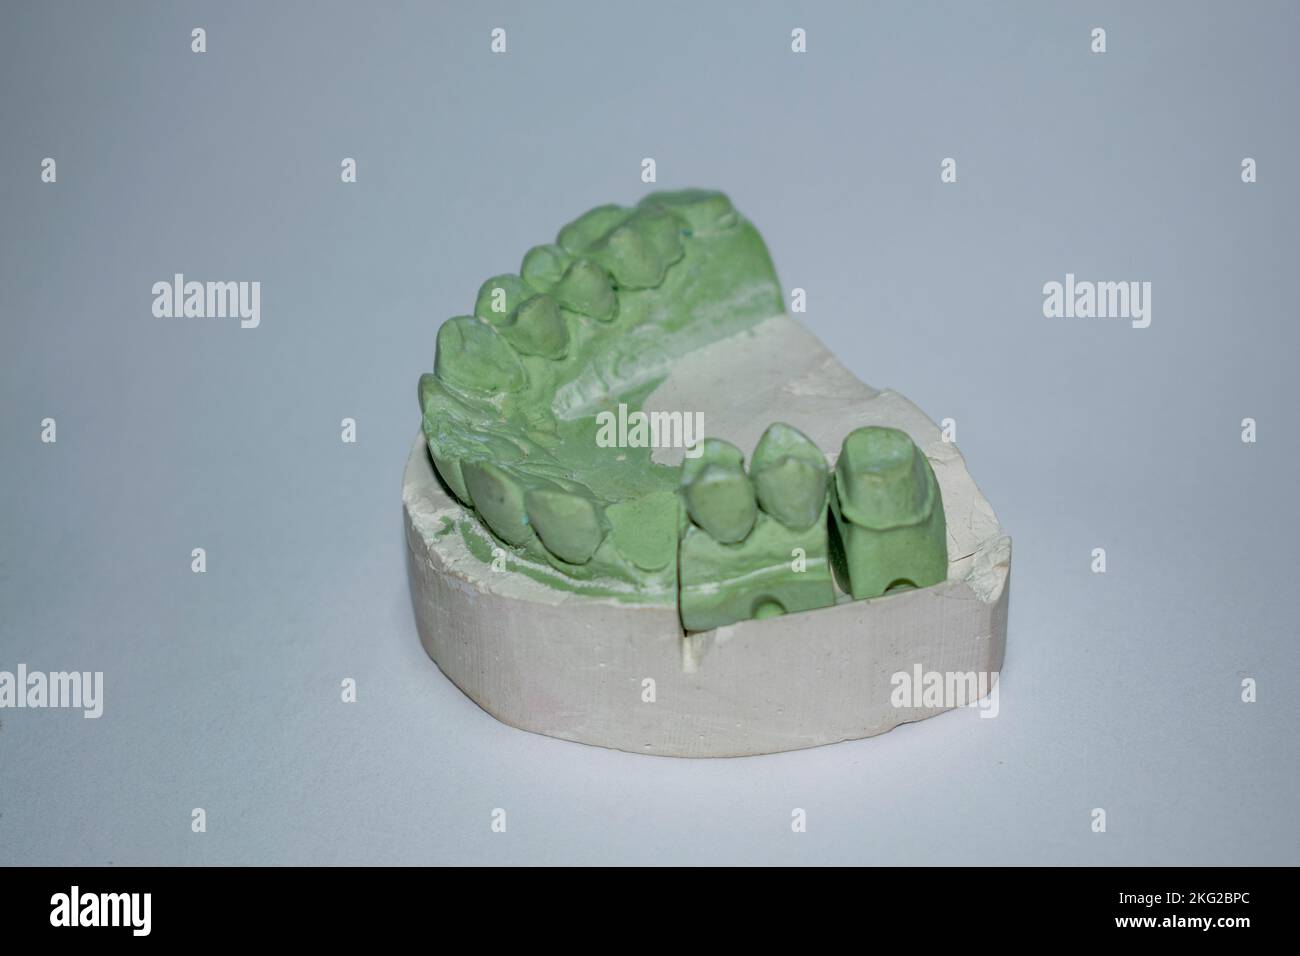 Plaster impressions of the teeth of the lower a jaw for prosthetics and implantation in dentistry. Stock Photo